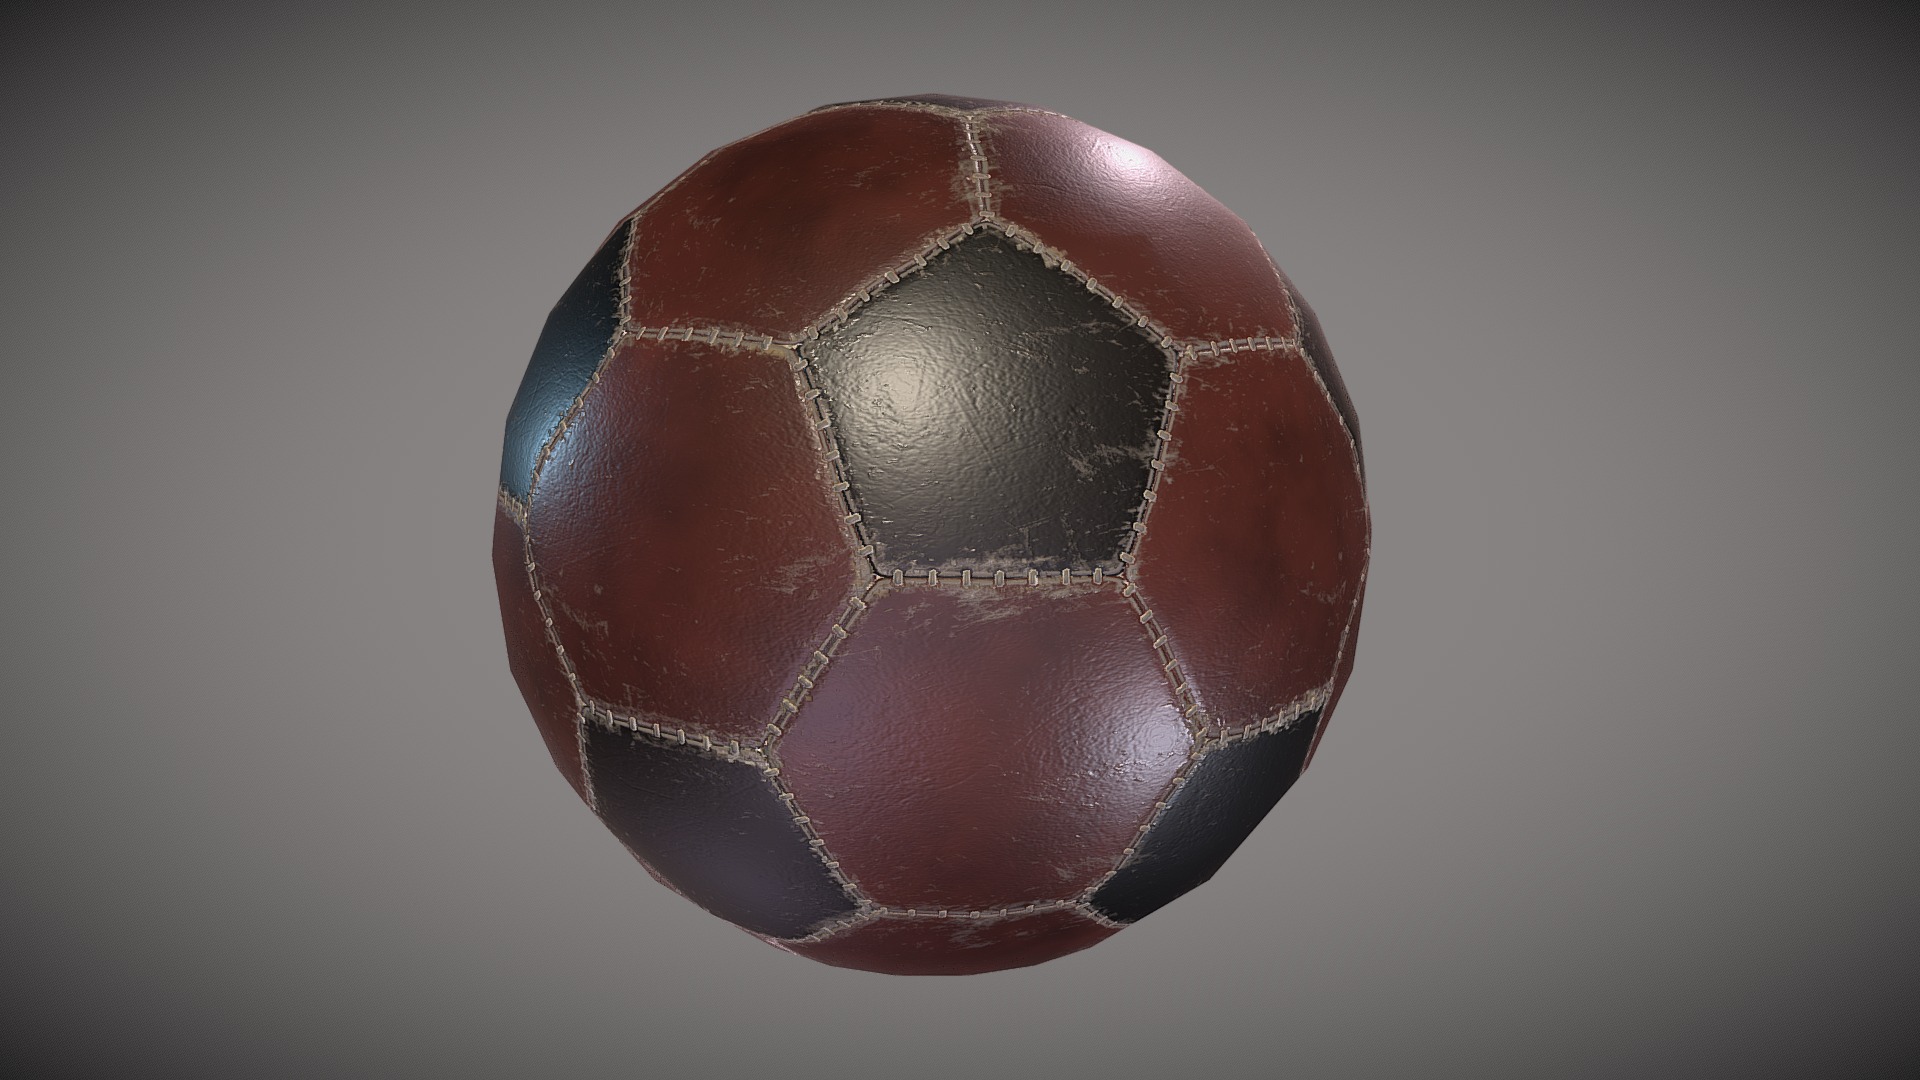 3D model Soccer Ball Dirt PBR low poly - This is a 3D model of the Soccer Ball Dirt PBR low poly. The 3D model is about a ball with a design on it.